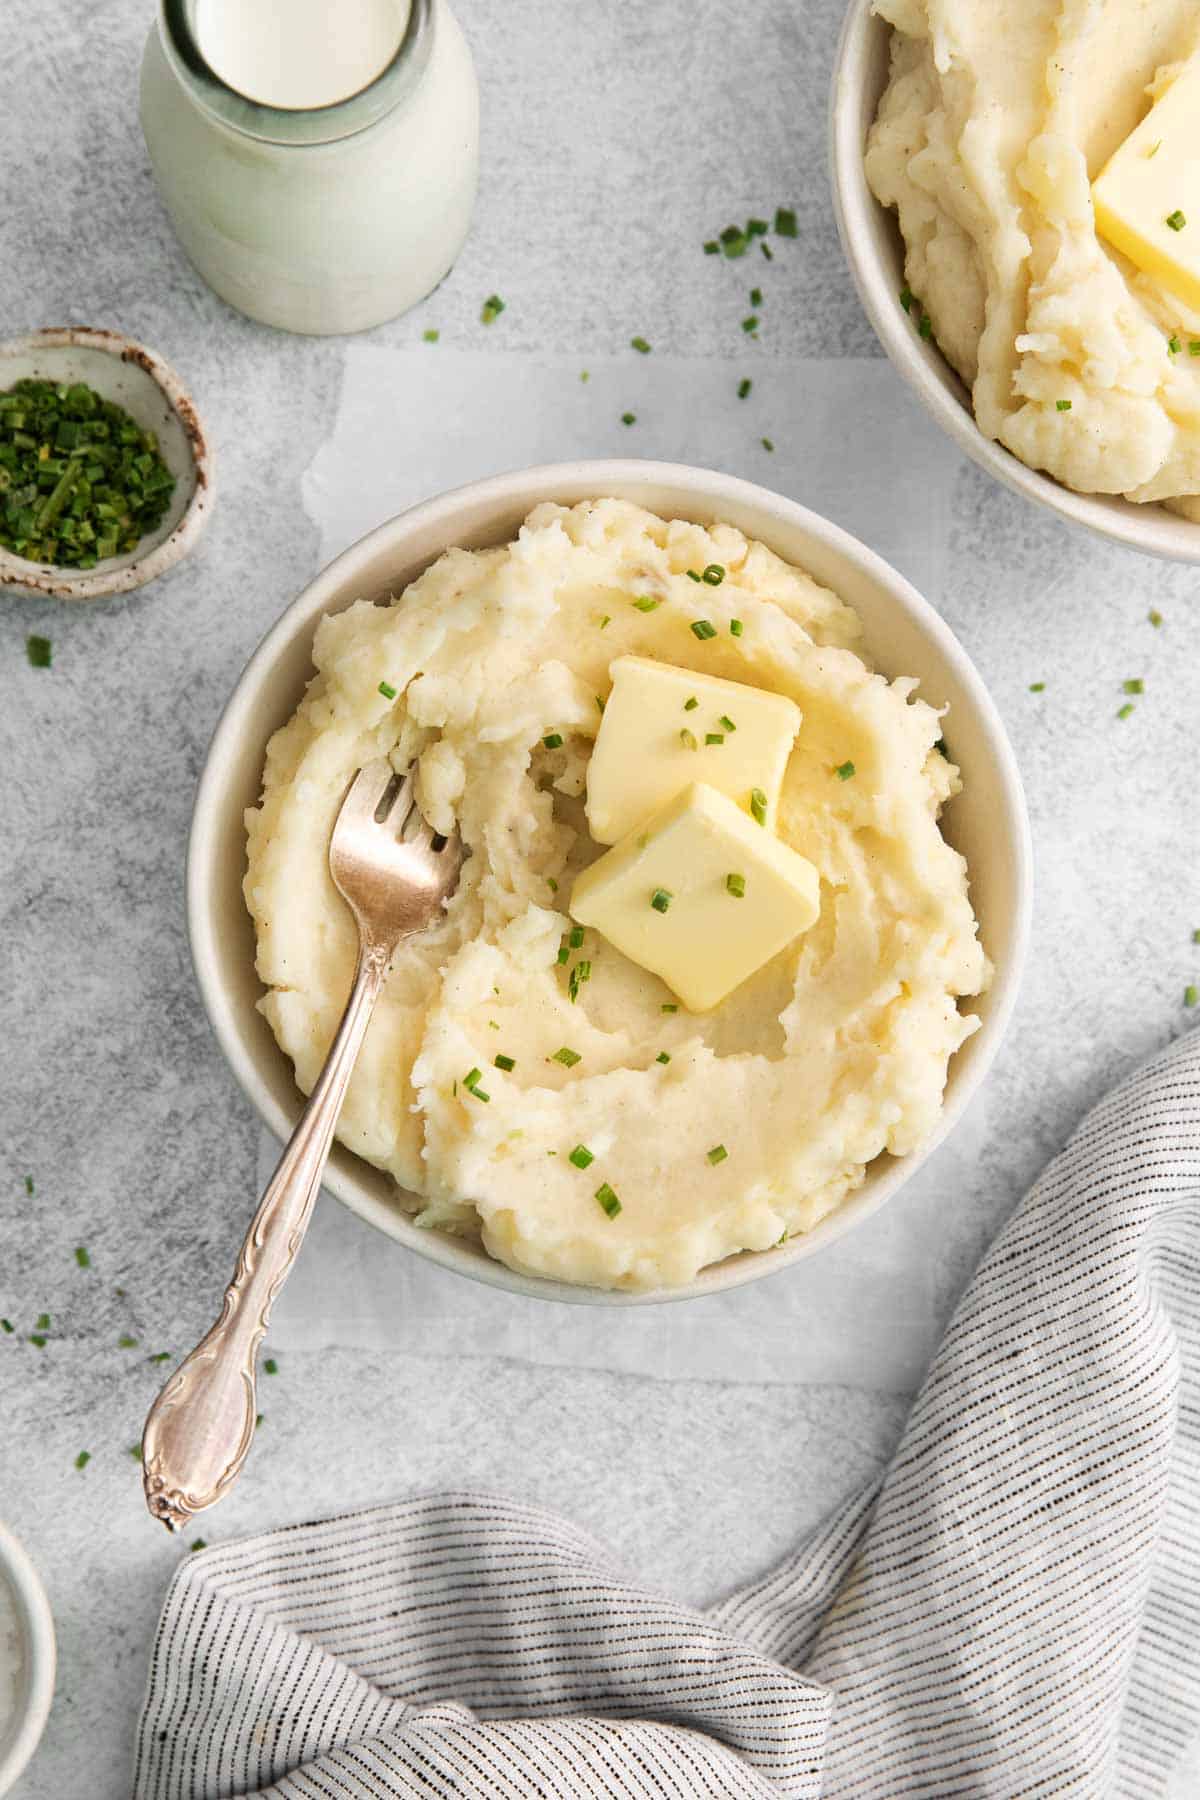 Gluten-free mashed potatoes in a bowl, with a pat of butter, parlsey, and a serving spoon